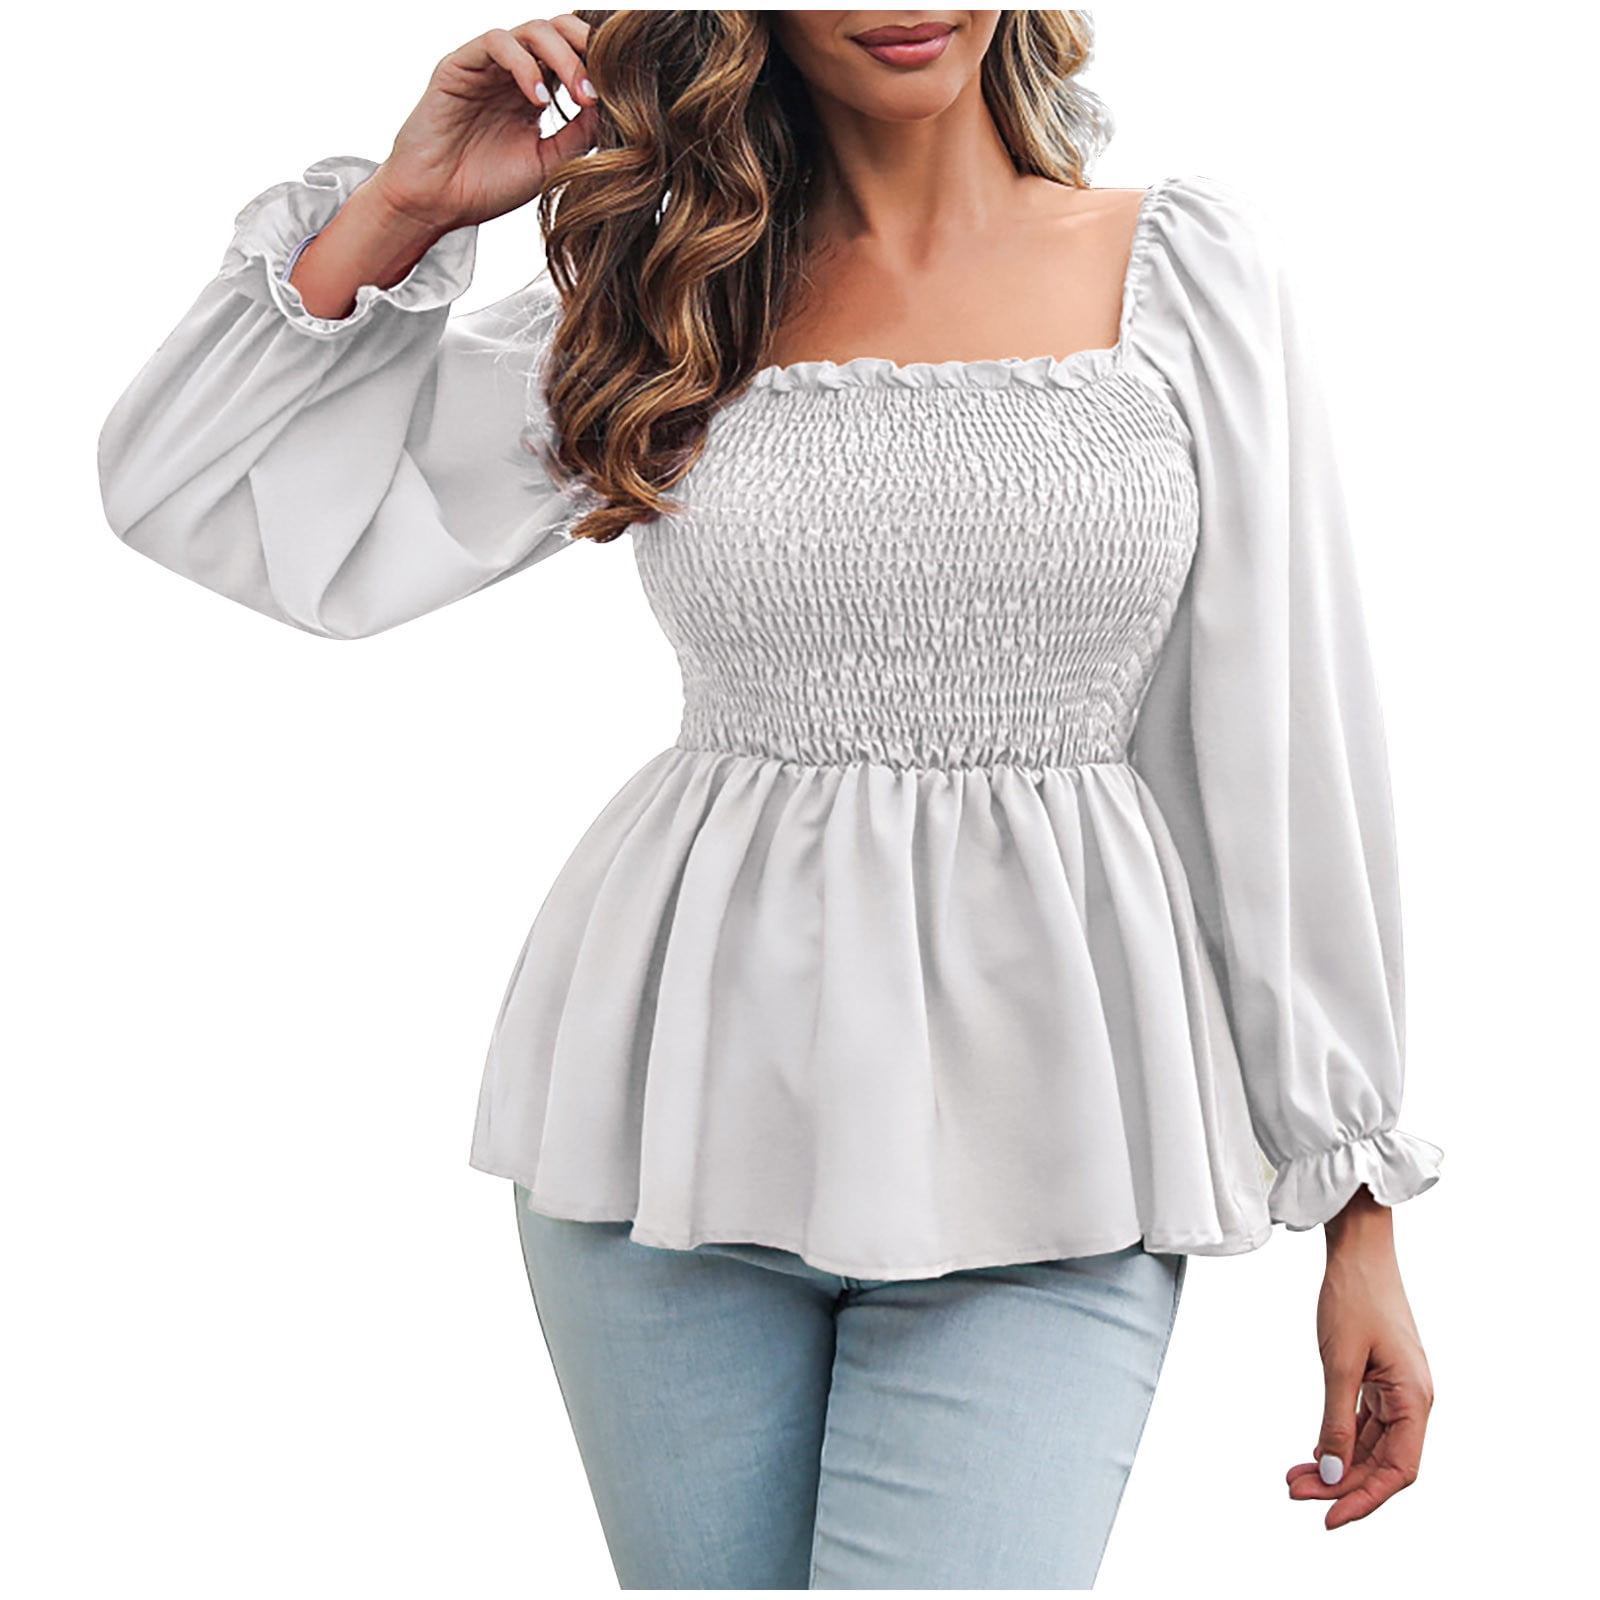 Boho Tops for Women Babydoll Tops V Neck Peasant Blouses Long Lantern  Sleeve Textured Lace Chiffon Going Out Flowy Shirts